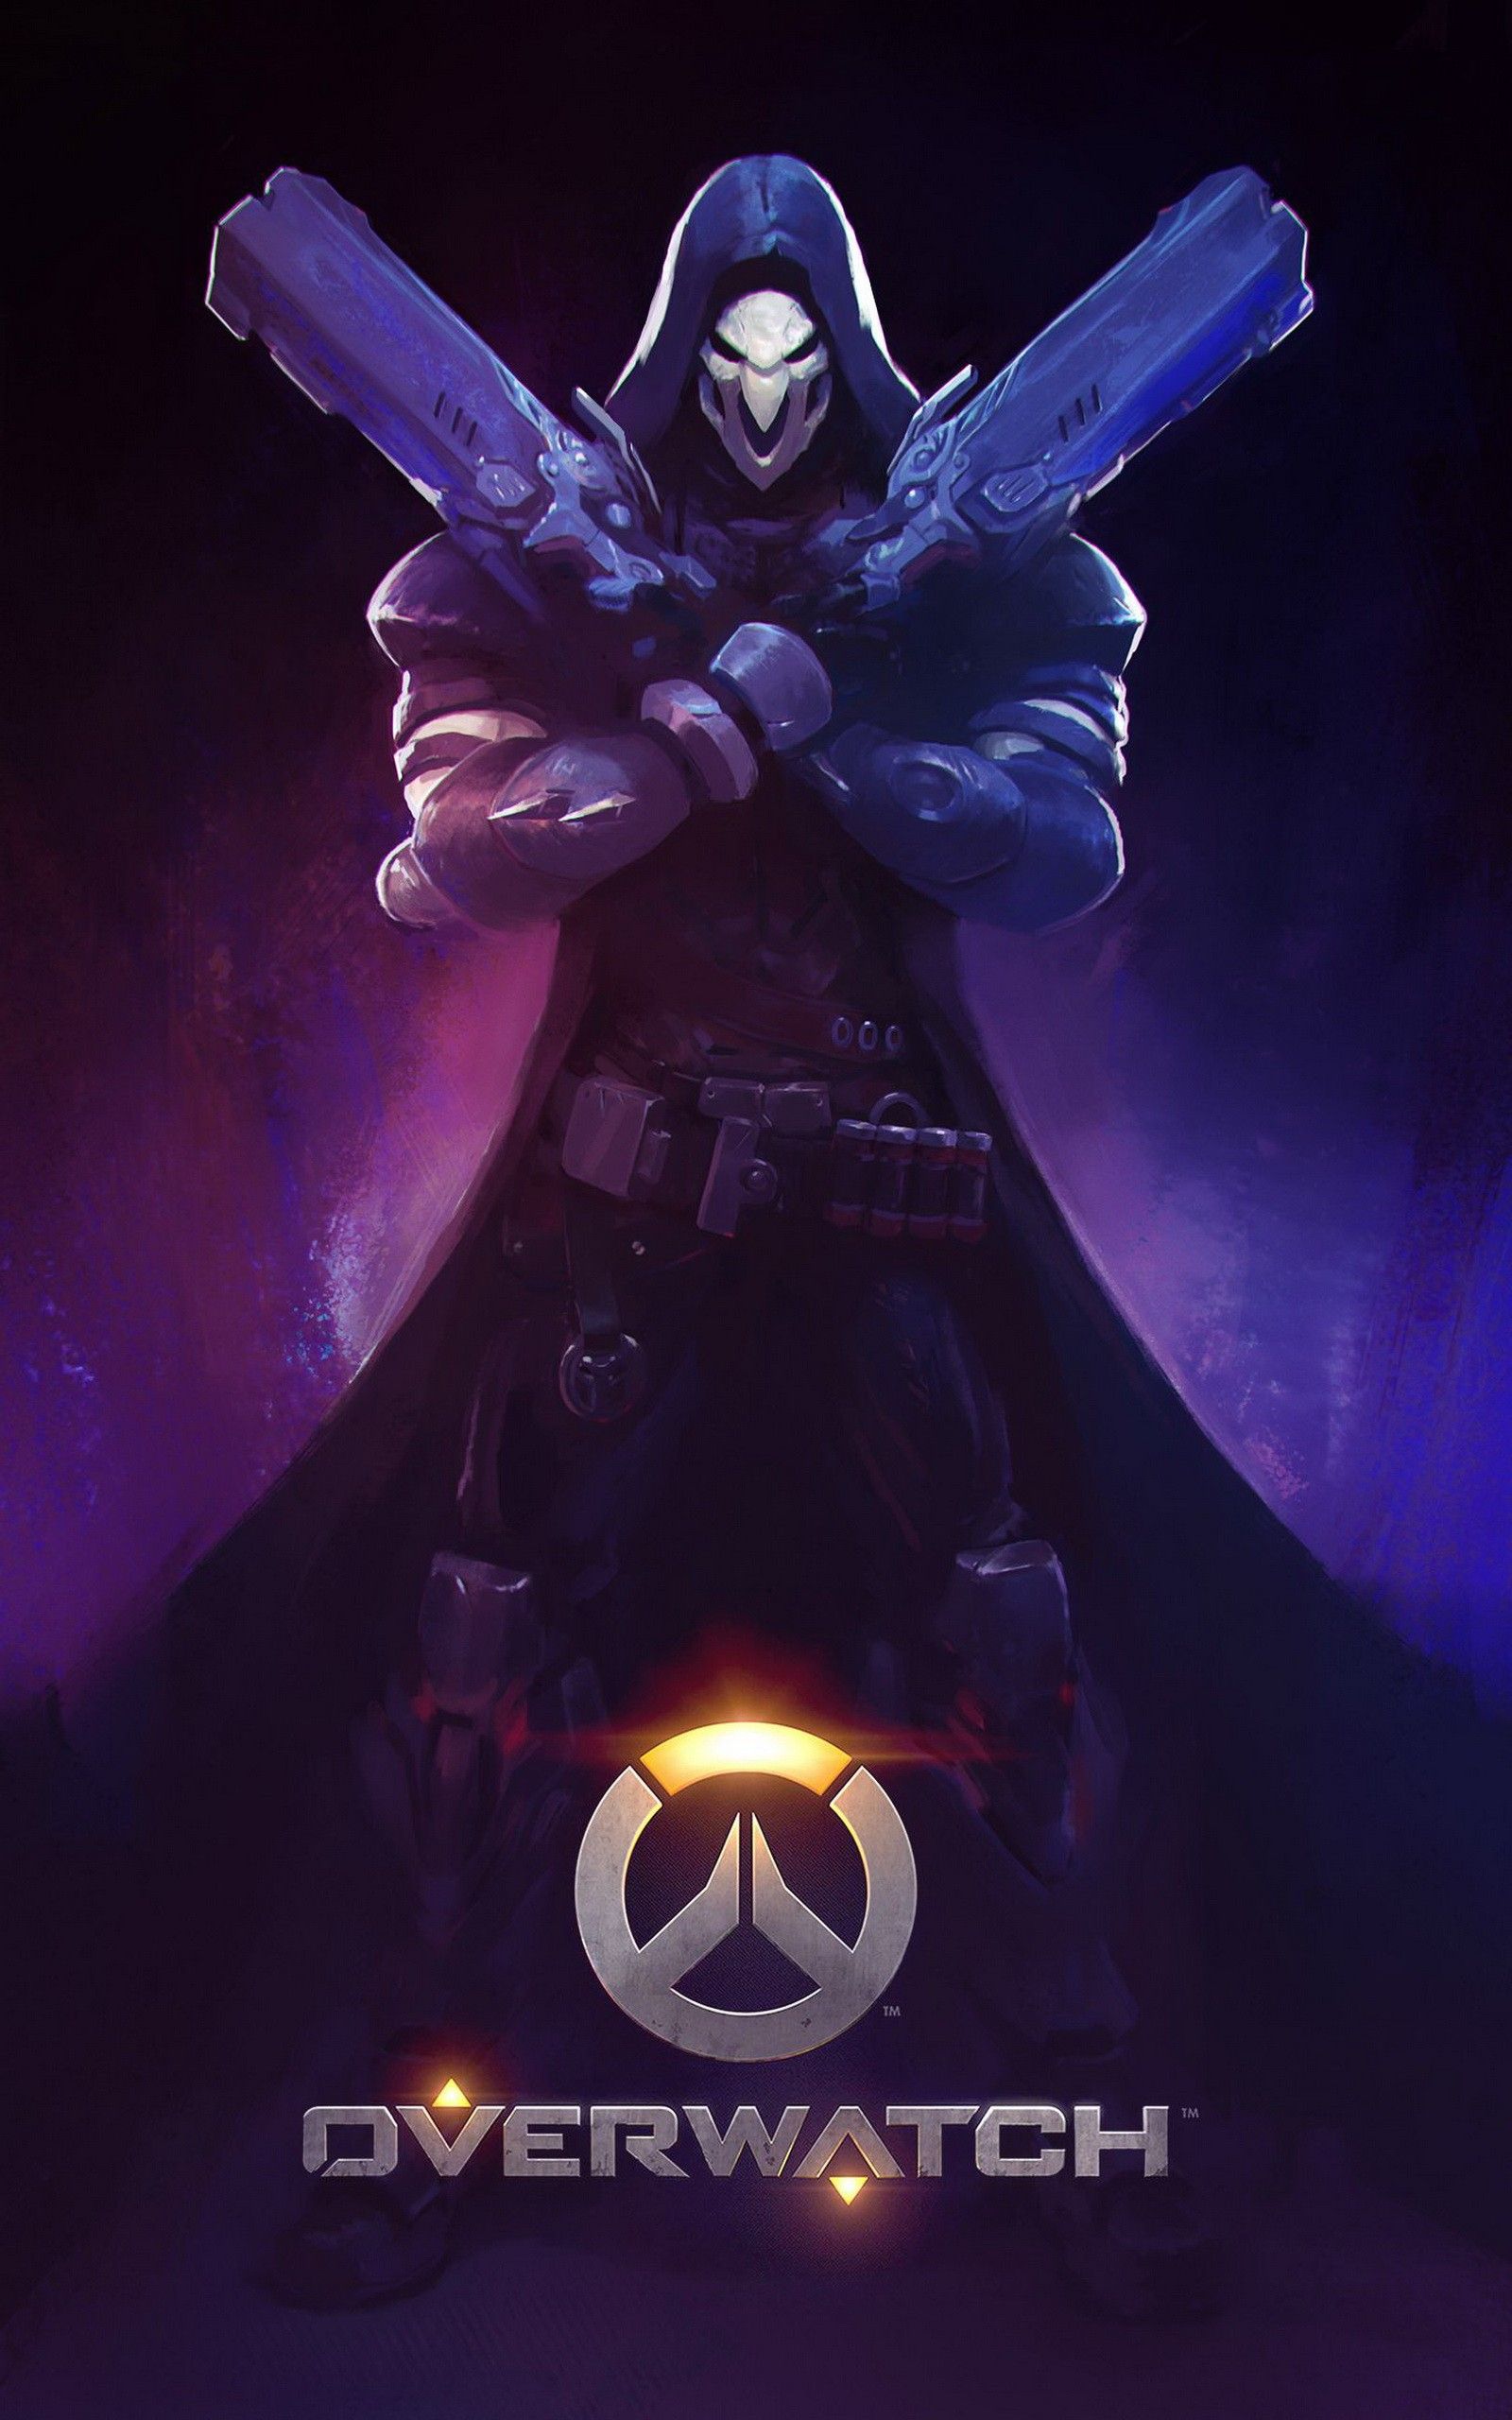 Download] 290+ Overwatch Wallpapers for Phone & Computer